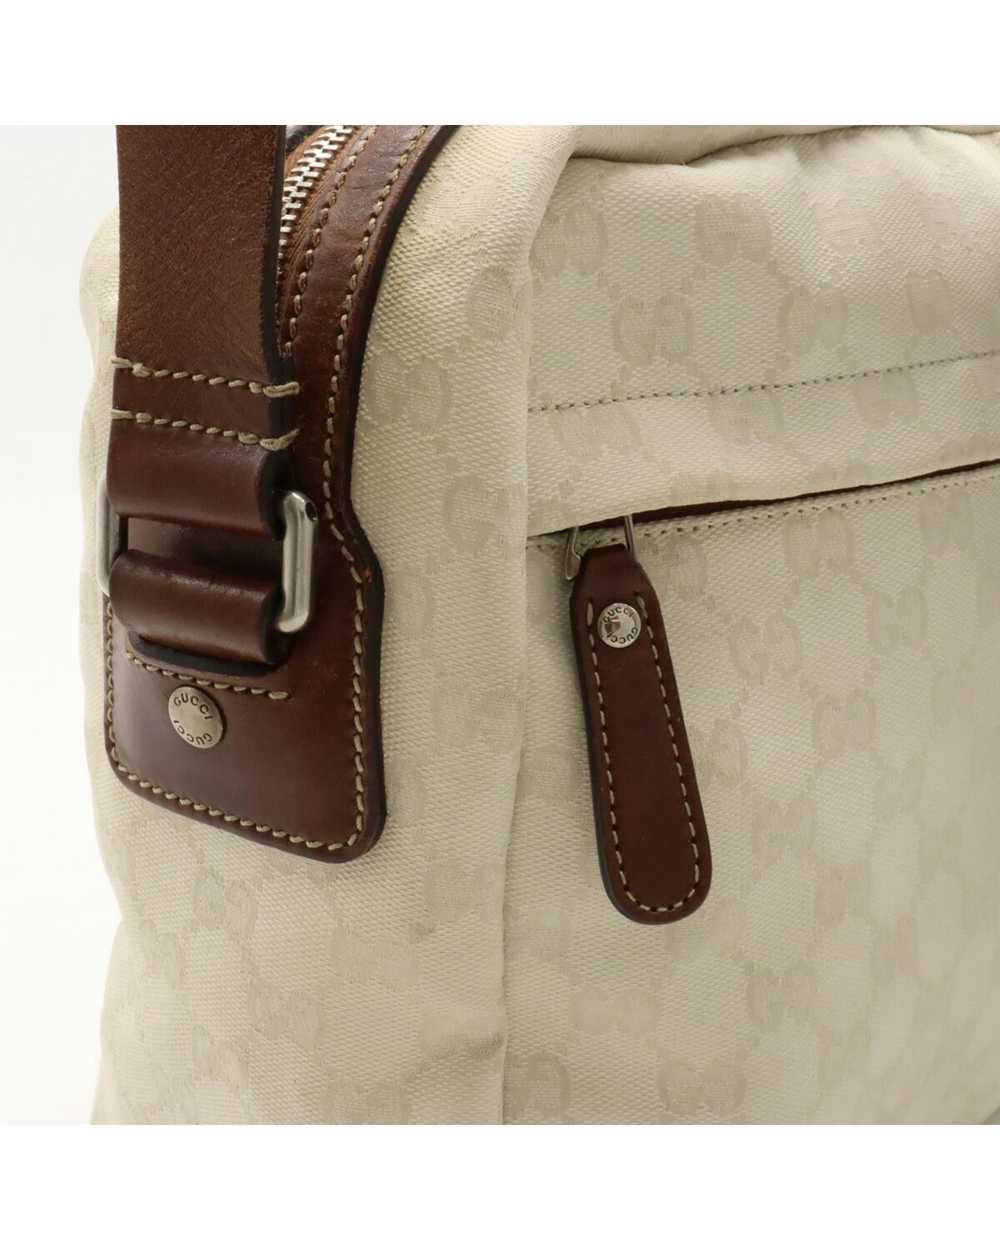 Gucci Canvas Shoulder Bag with Dust Bag by Luxury… - image 8